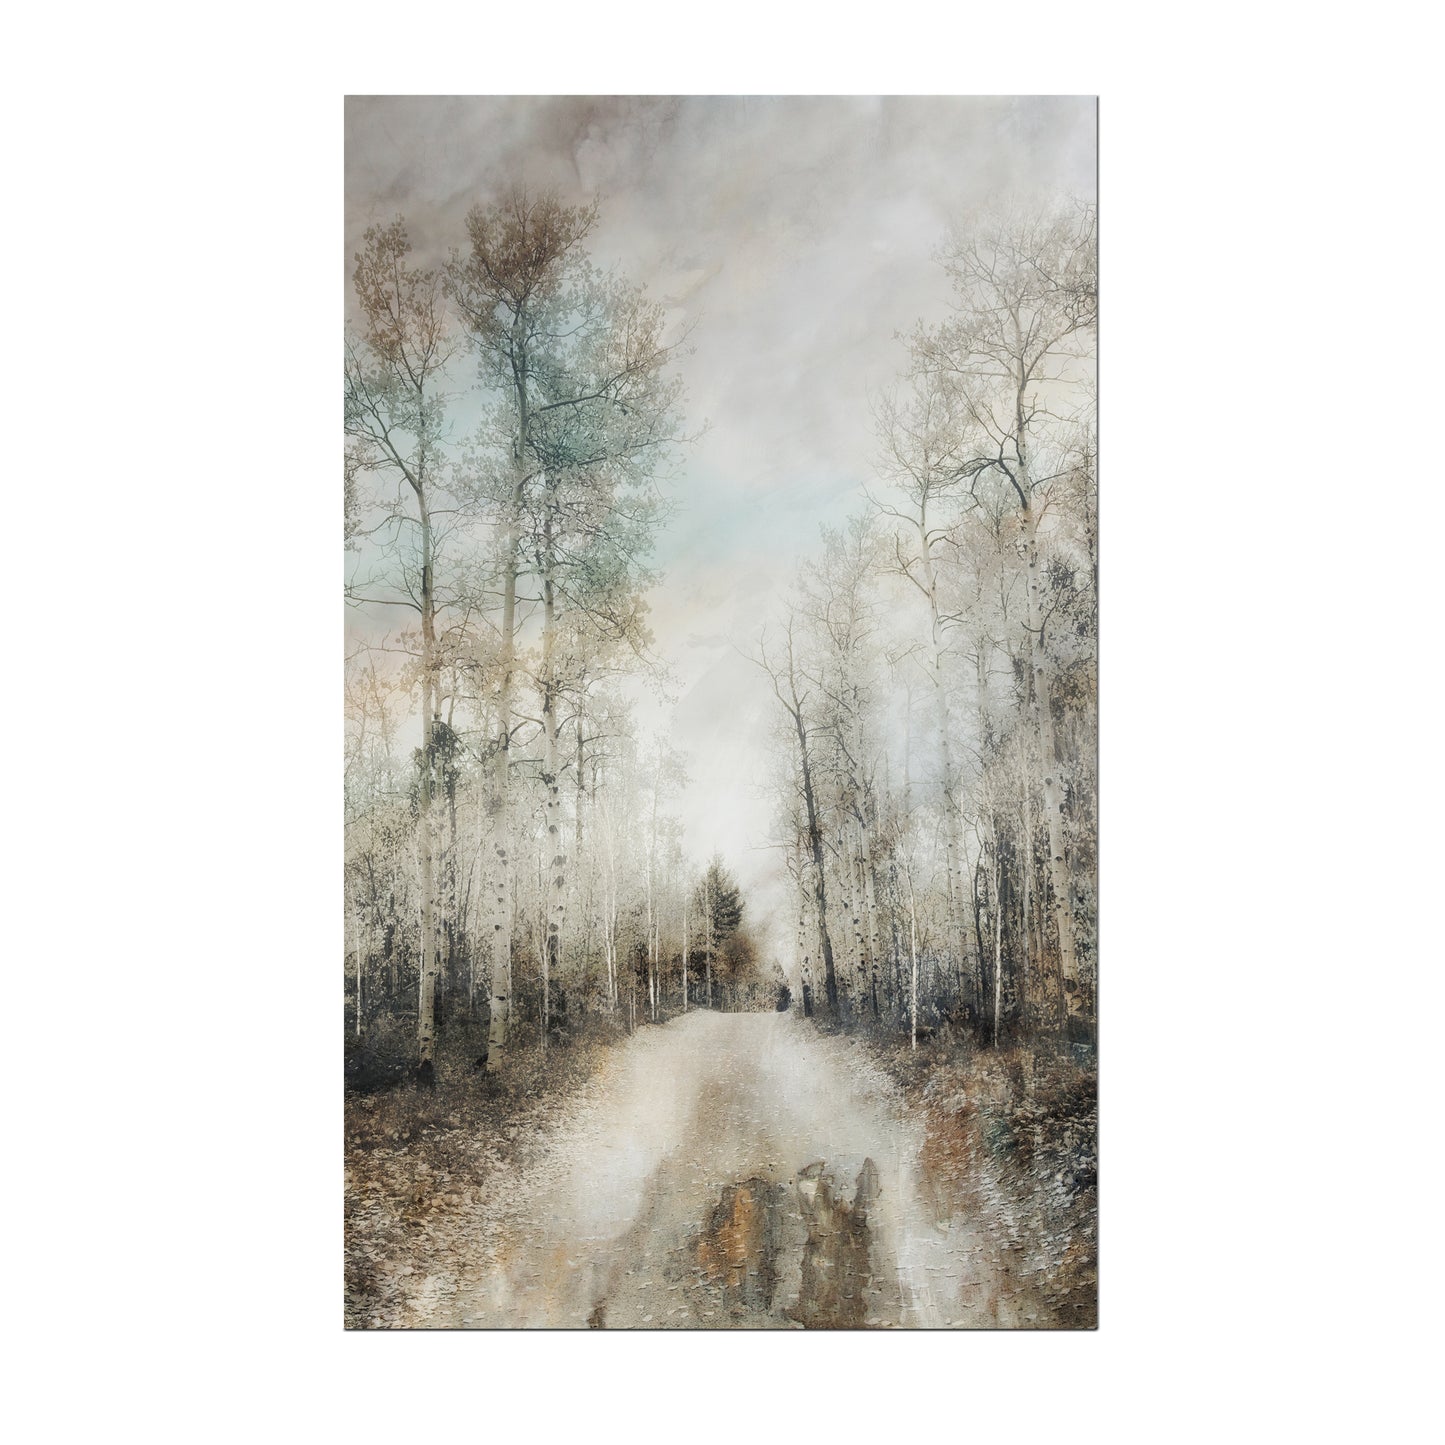 print or canvas of aspen trees and along a country road